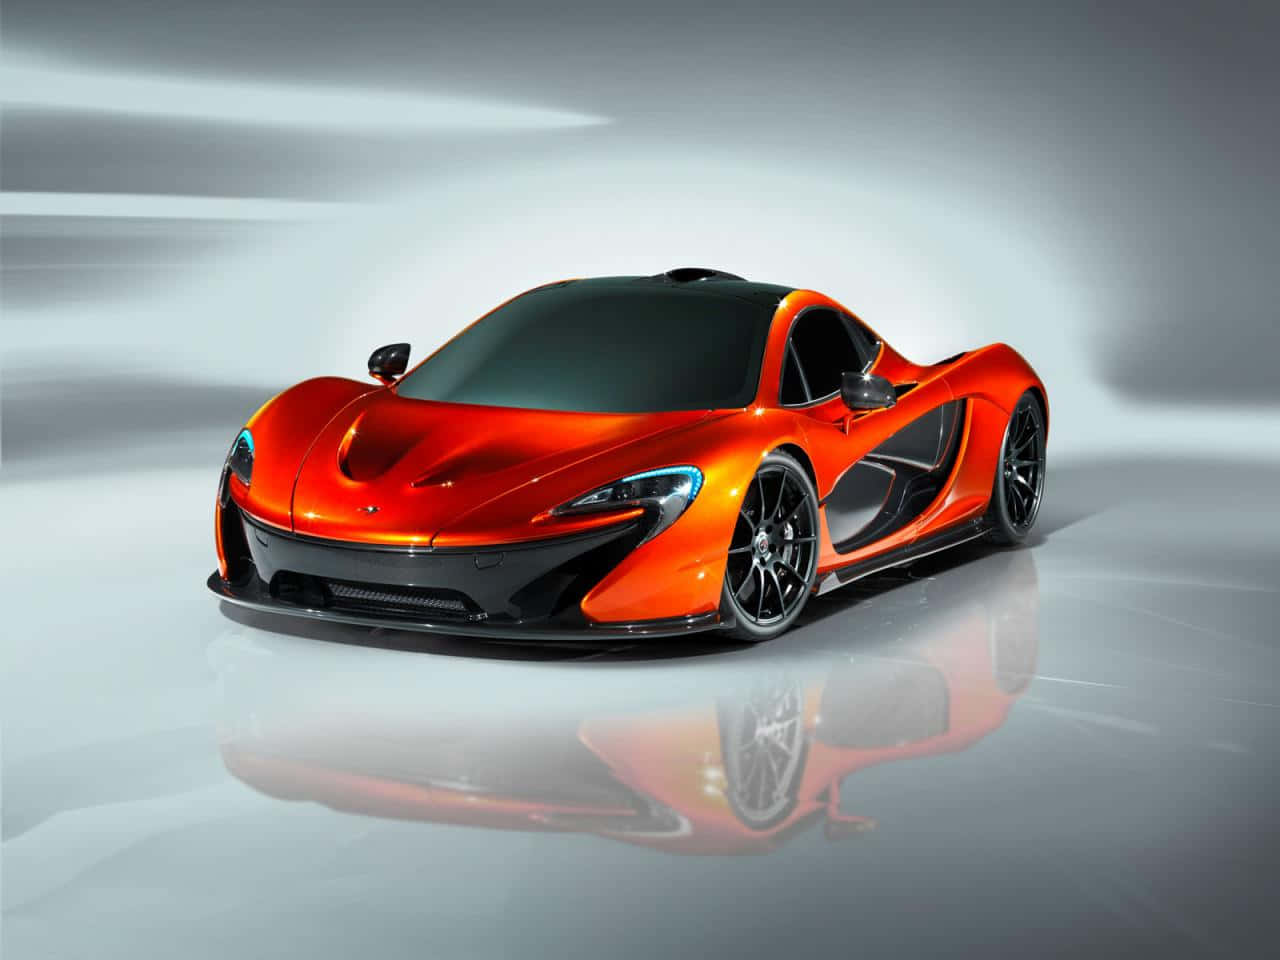 "The Future of Automotive Design with the Mclaren"